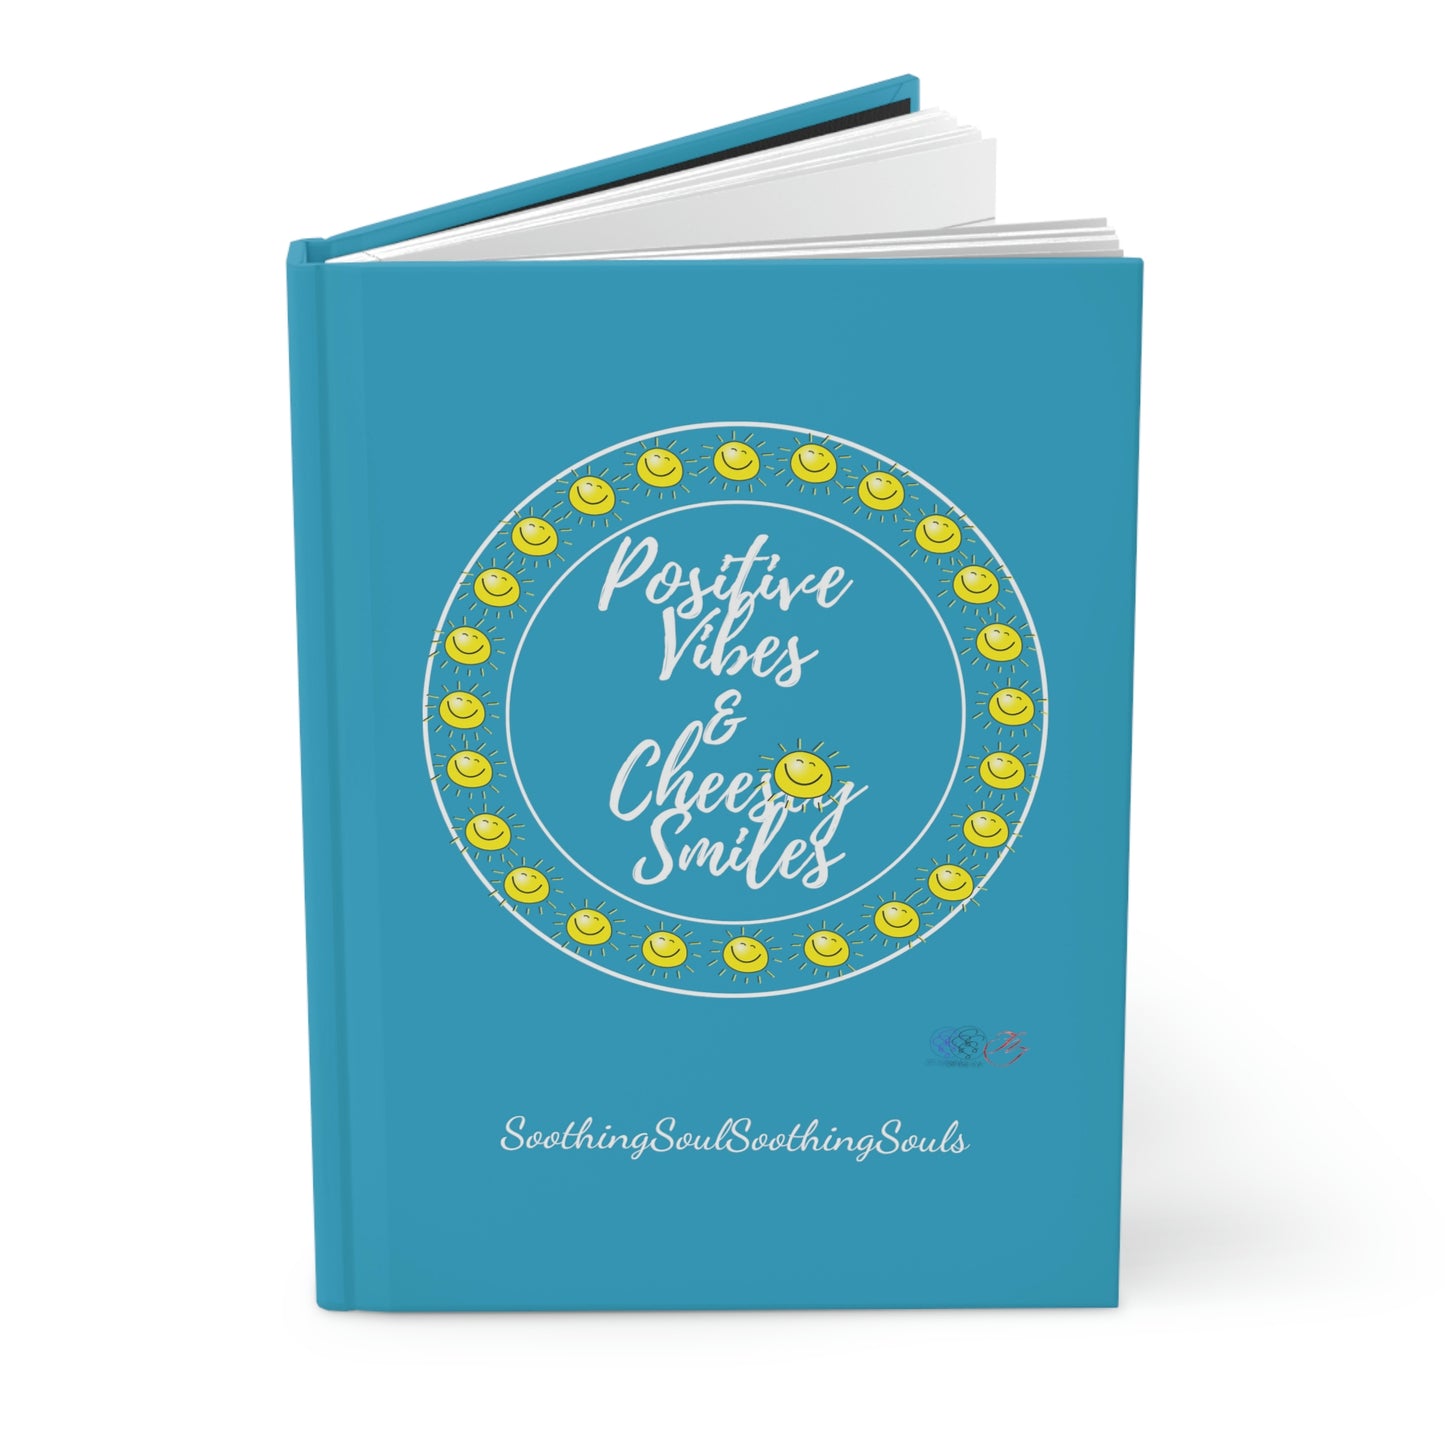 SSSS Positive Vibes & Cheesey Smiles Hardcover Journal Turquois